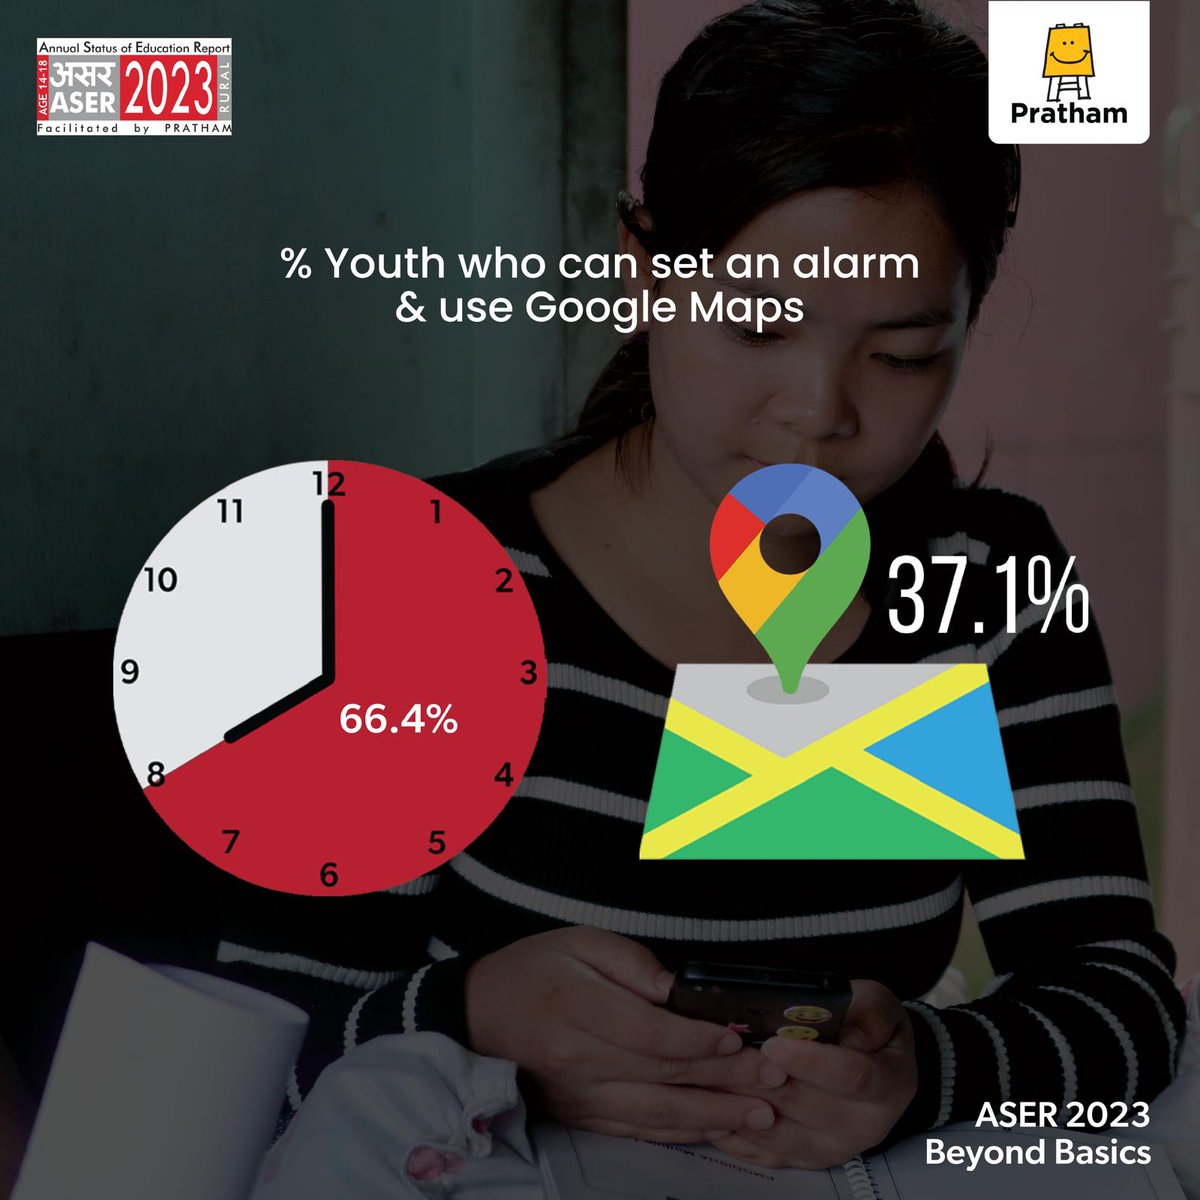 Digital technologies bring immense promise and potential for a brighter future, but are young people ready to use it in the right direction? ASER 2023 explored the digital access and skills of youth aged 14-18 in rural India. To know more, visit asercentre.org